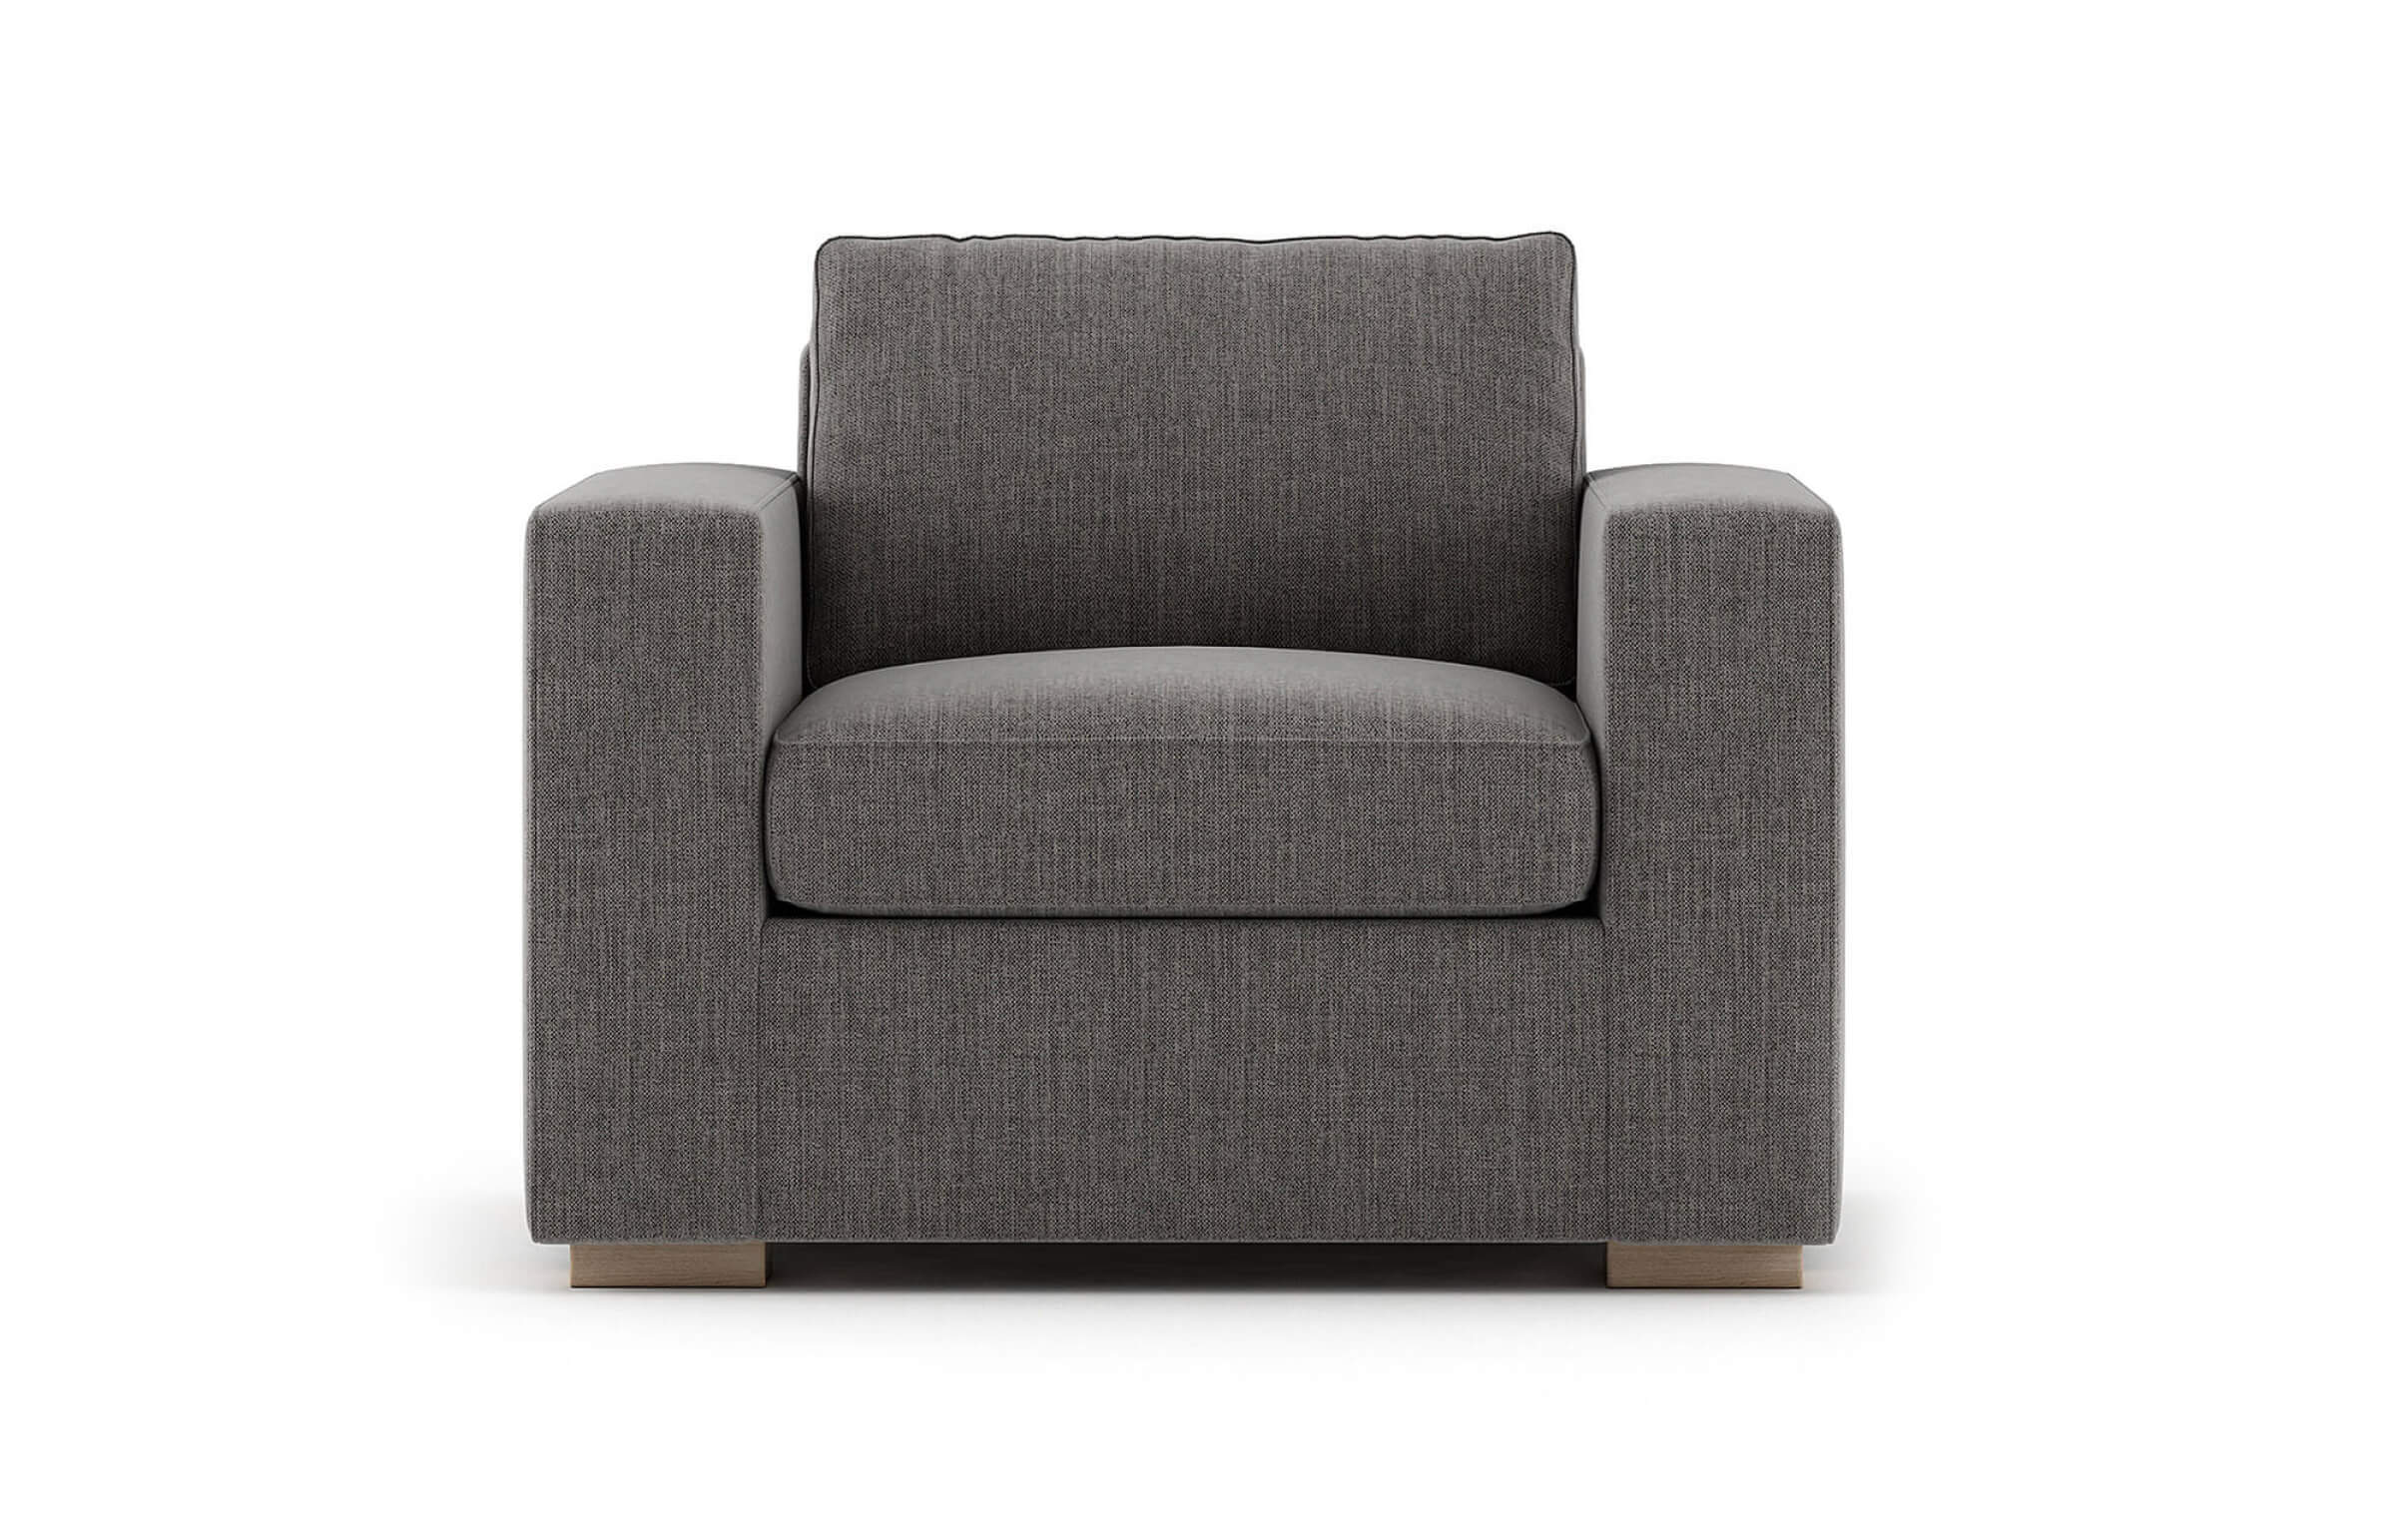 G: Rio Chair in gray fabric